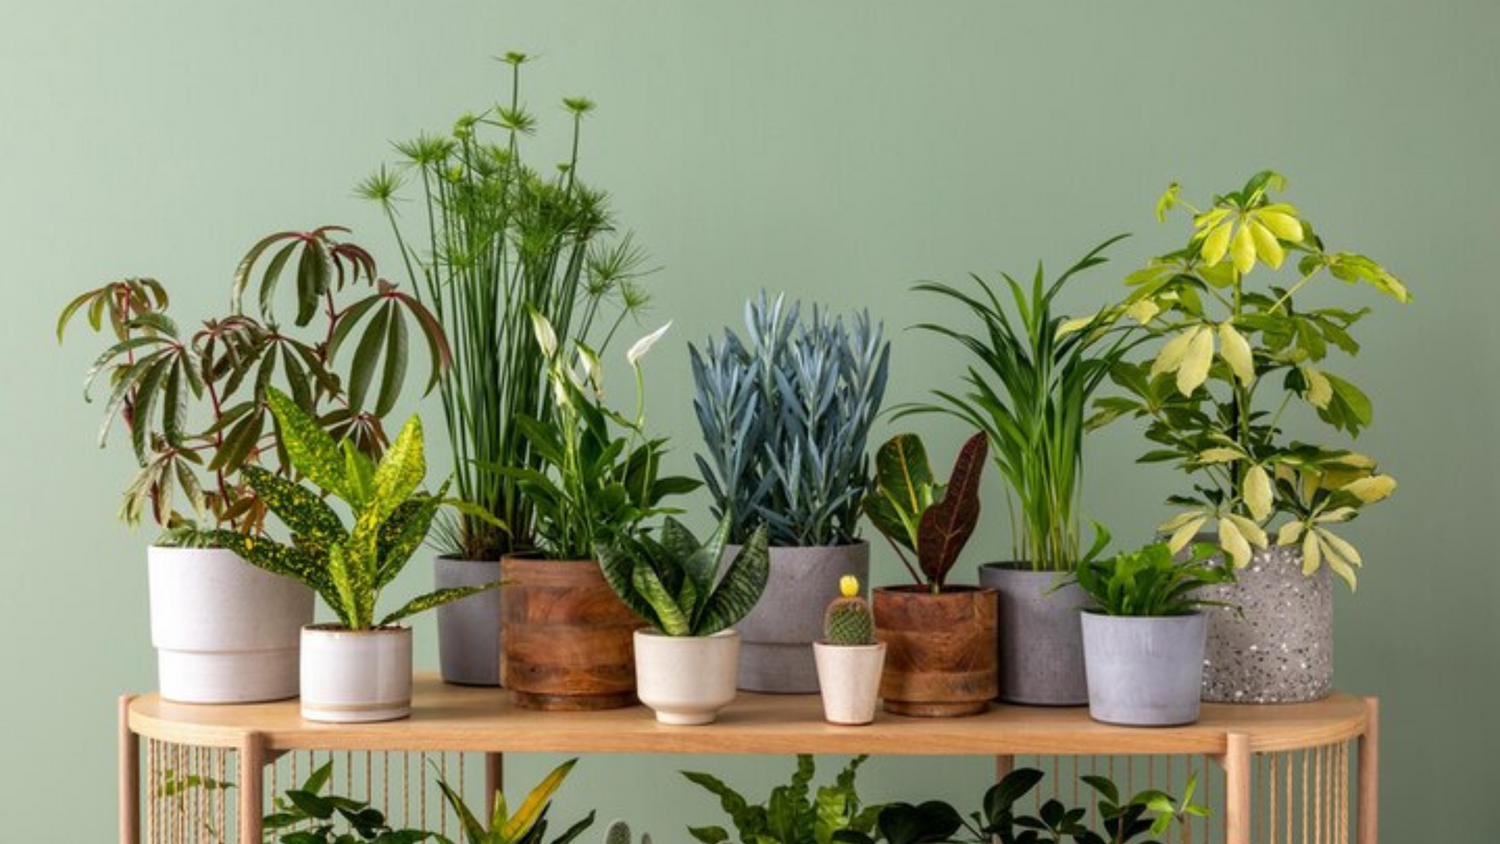 Greening Your Space: The Ultimate Indoor Plants in Pots Guide